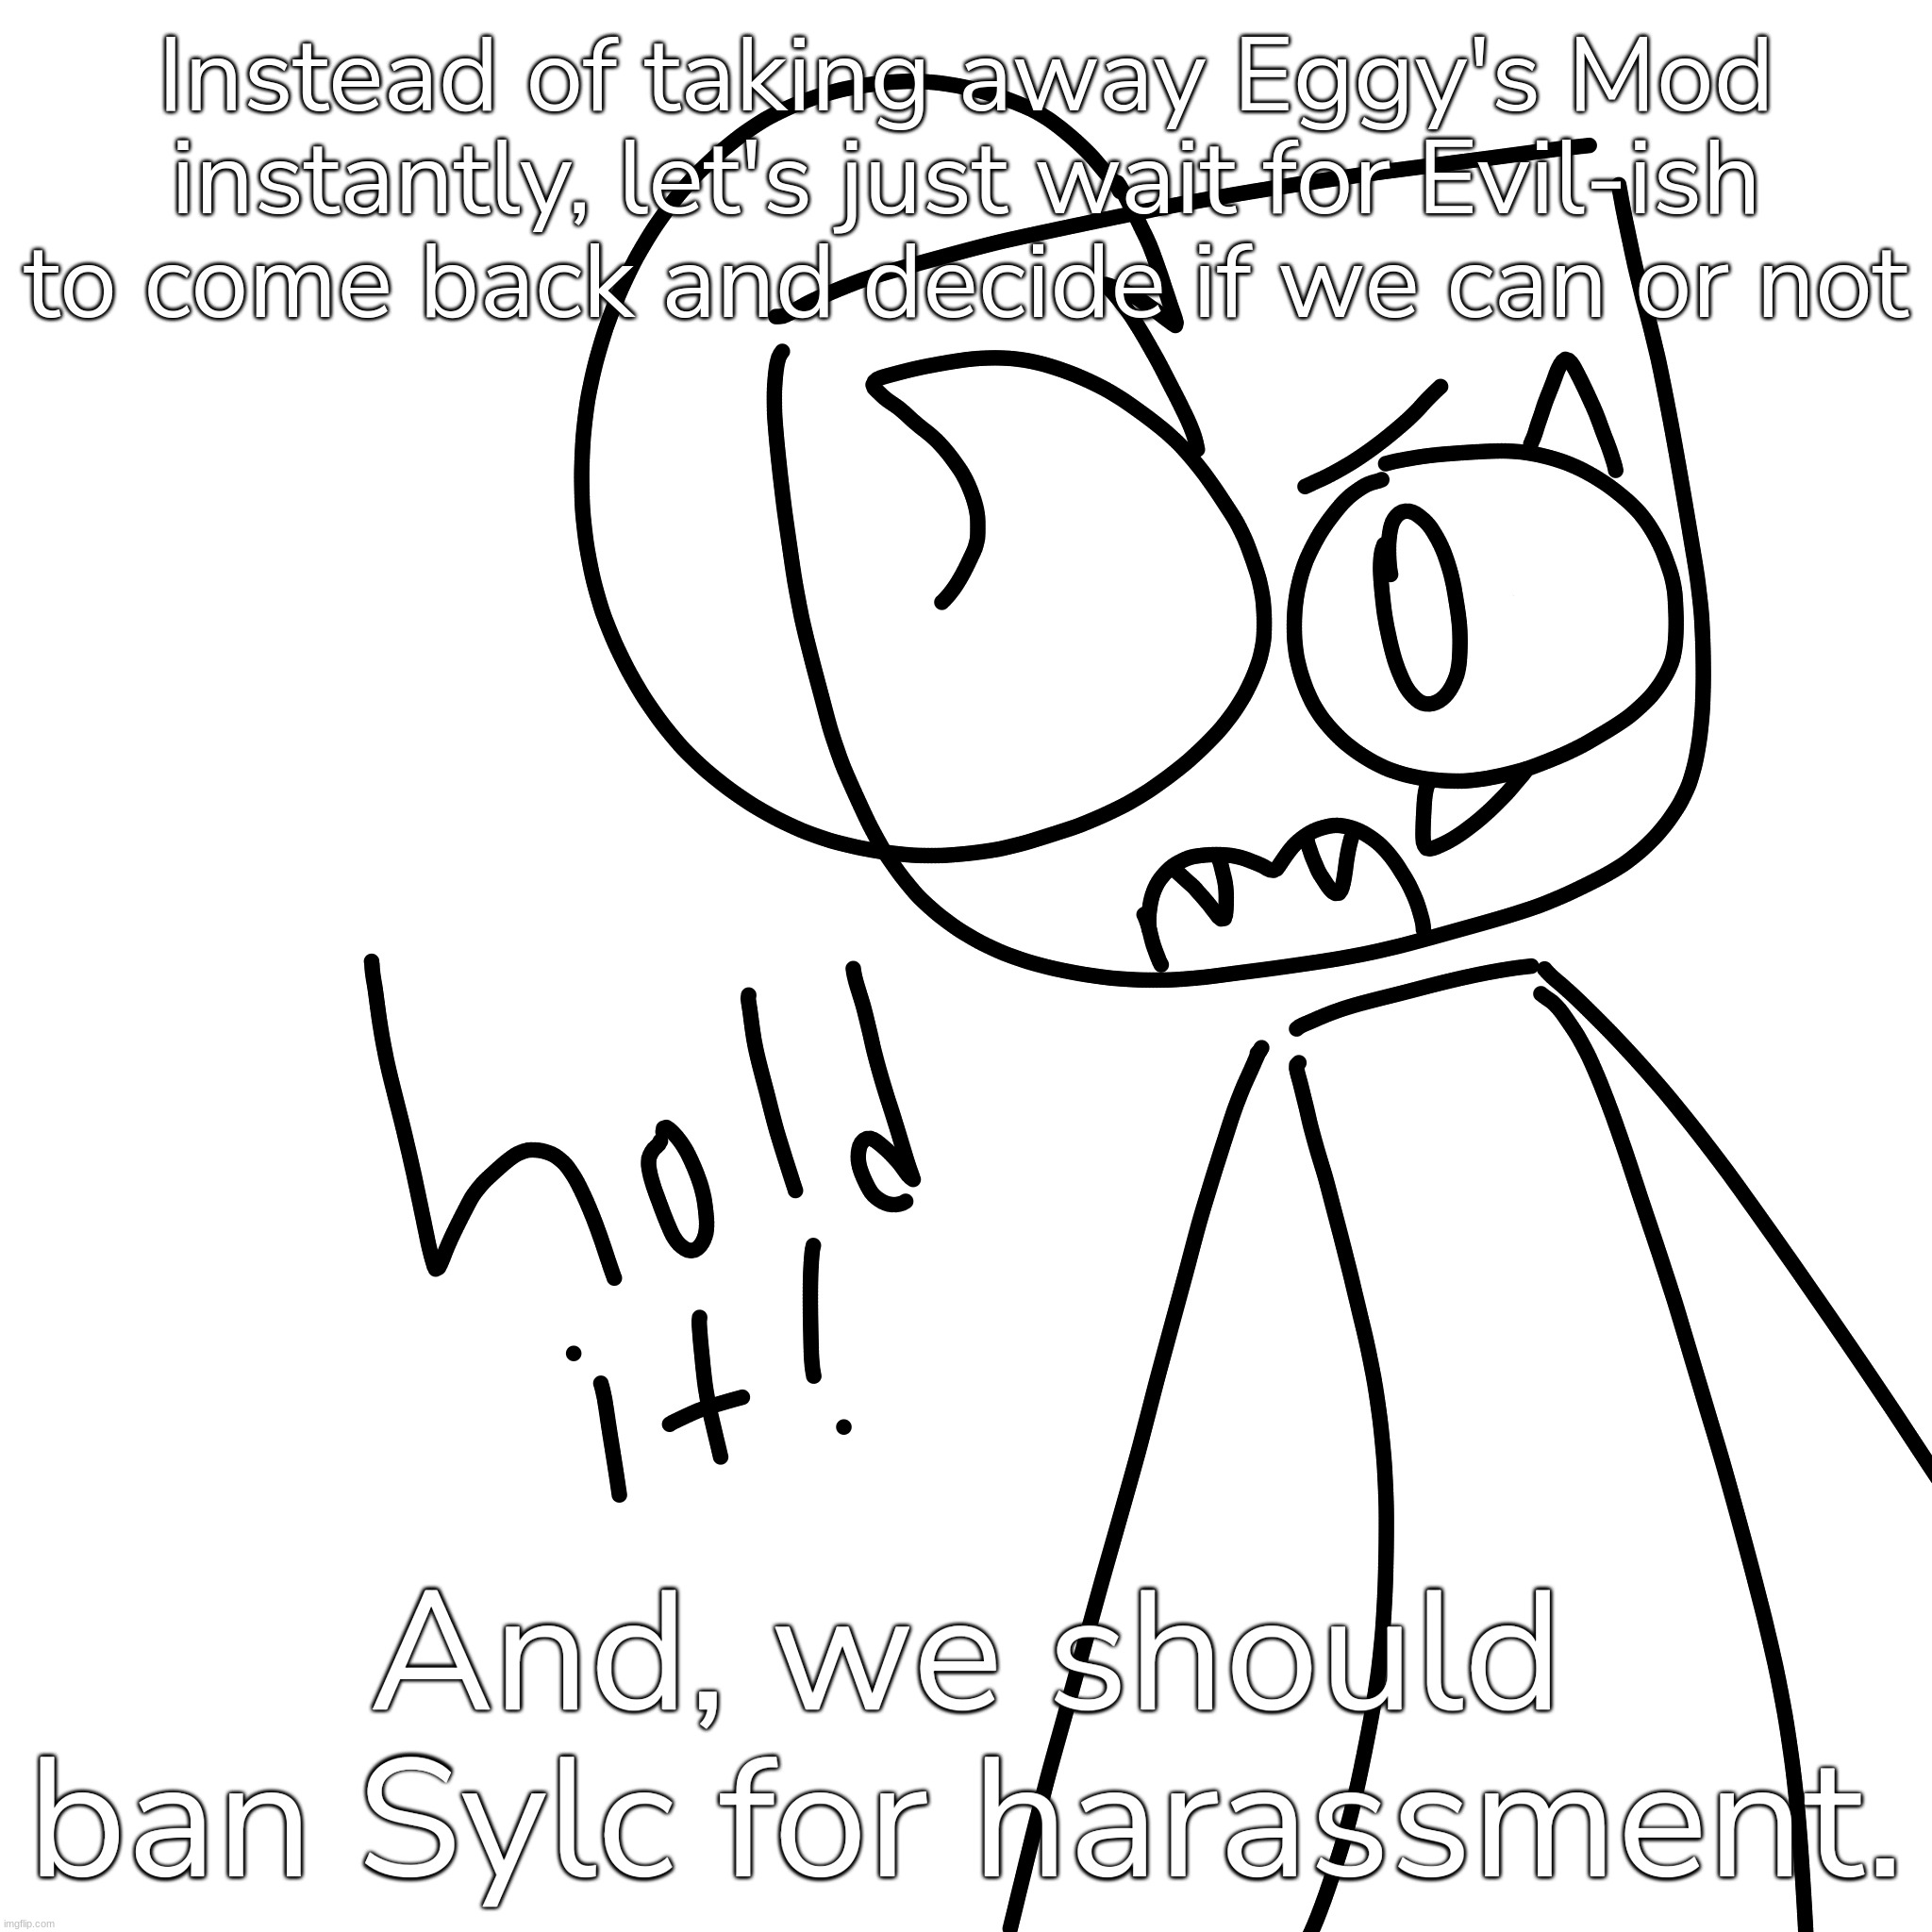 Instead of taking away Eggy's Mod instantly, let's just wait for Evil-ish to come back and decide if we can or not; And, we should ban Sylc for harassment. | made w/ Imgflip meme maker